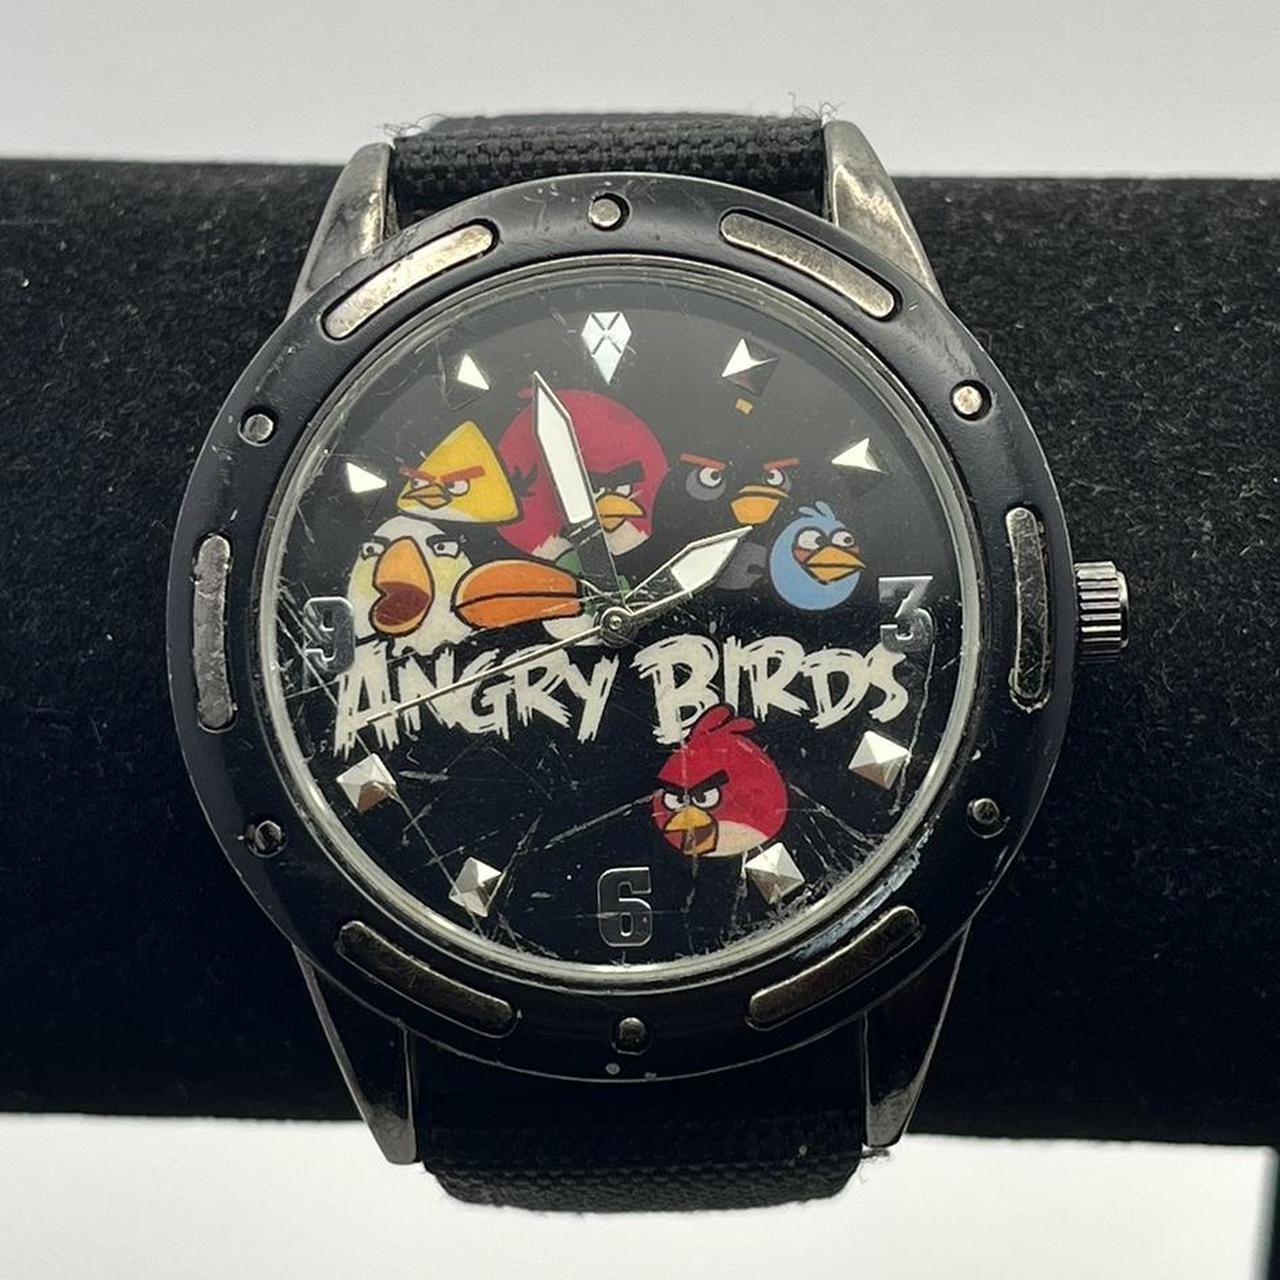 Watch Angry Birds